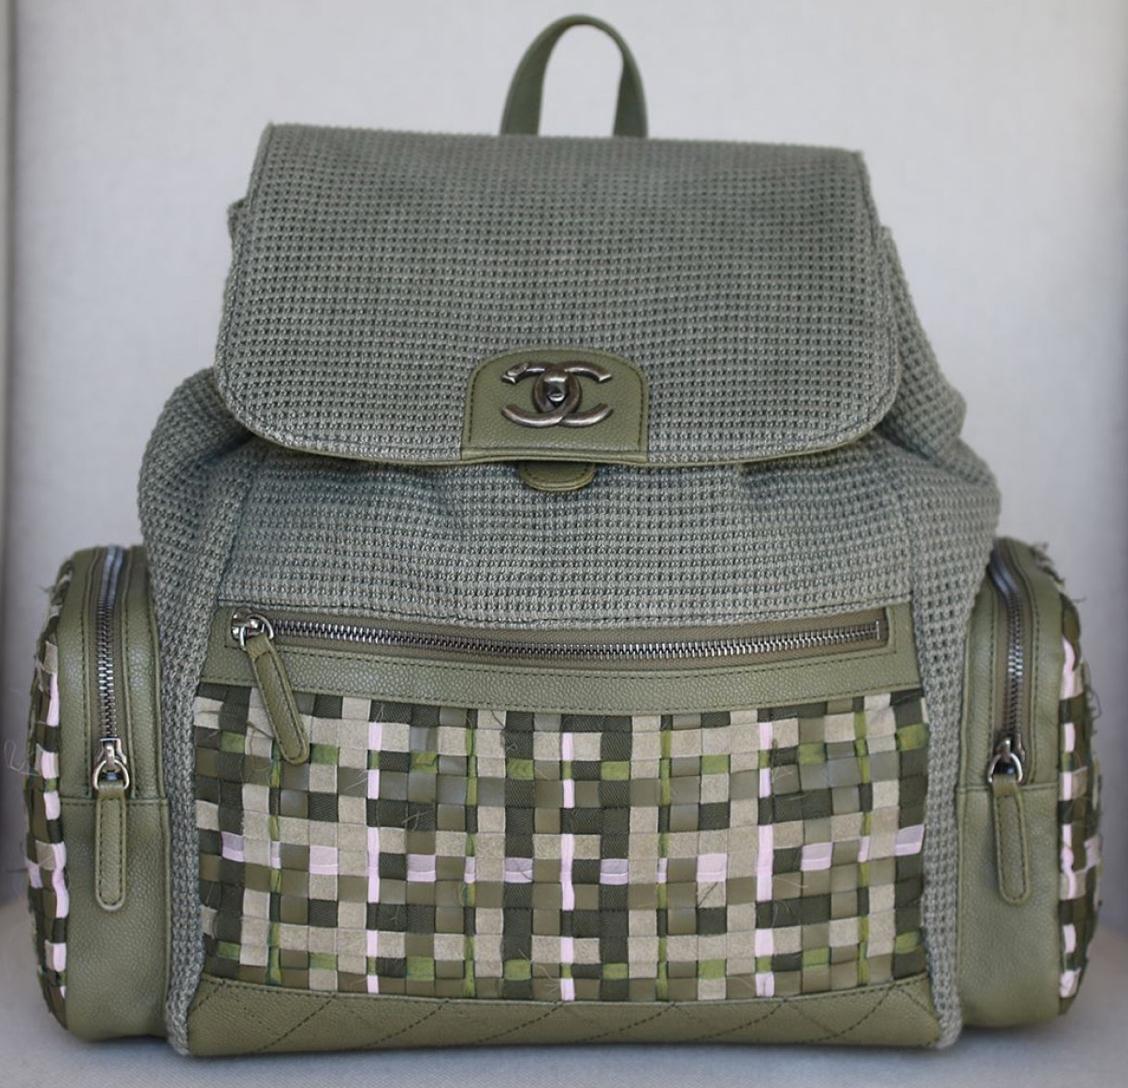 Chanel 2017 Cruise Collection Limited Edition Runway Coco Cuba woven canvas and tweed backpack. Green and pink woven patchwork detail. Chanel Canvas Twist backpack with antiqued silver-tone hardware, green lambskin leather trim, leather top handle